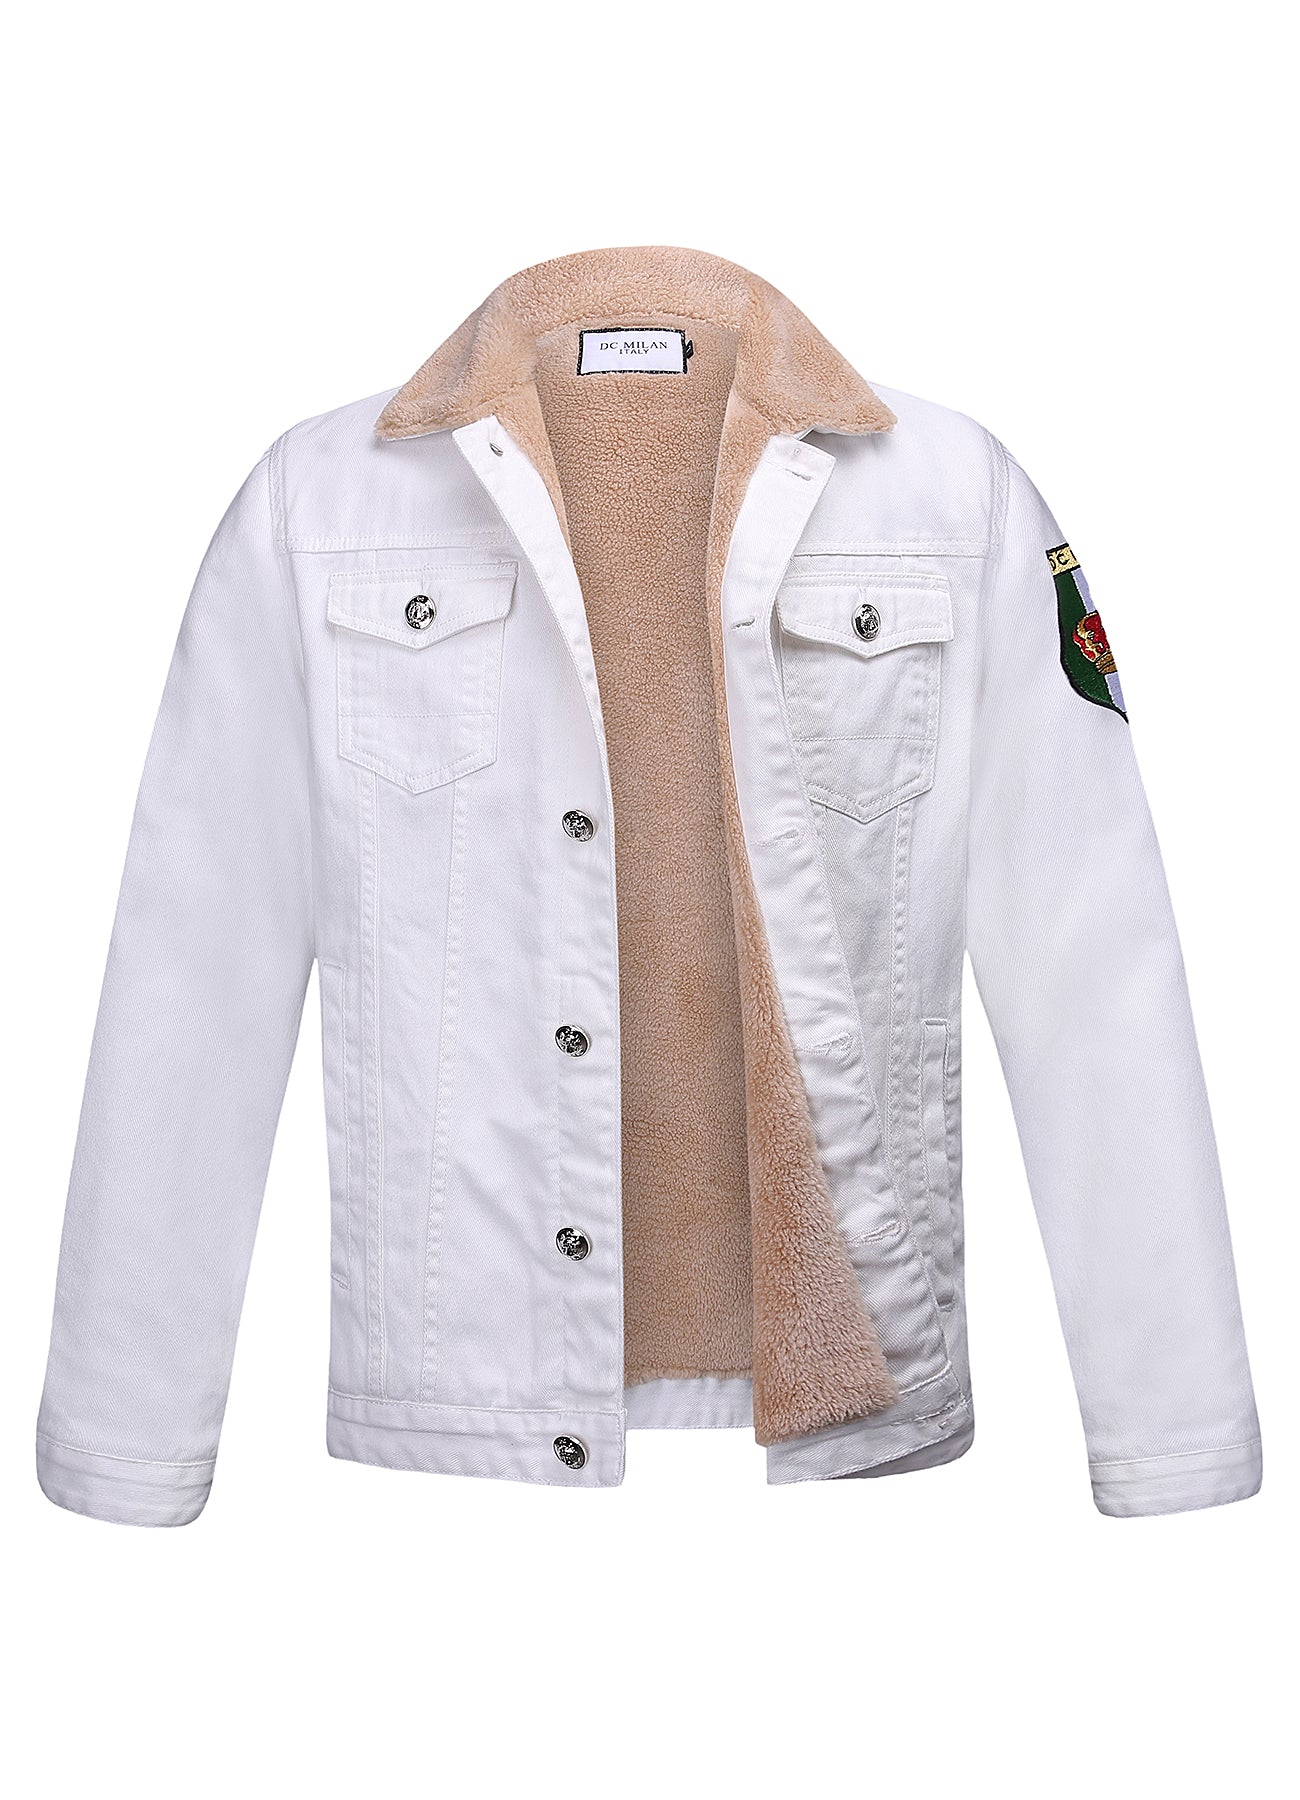 Embroidered White Denim Jacket With Faux Fur